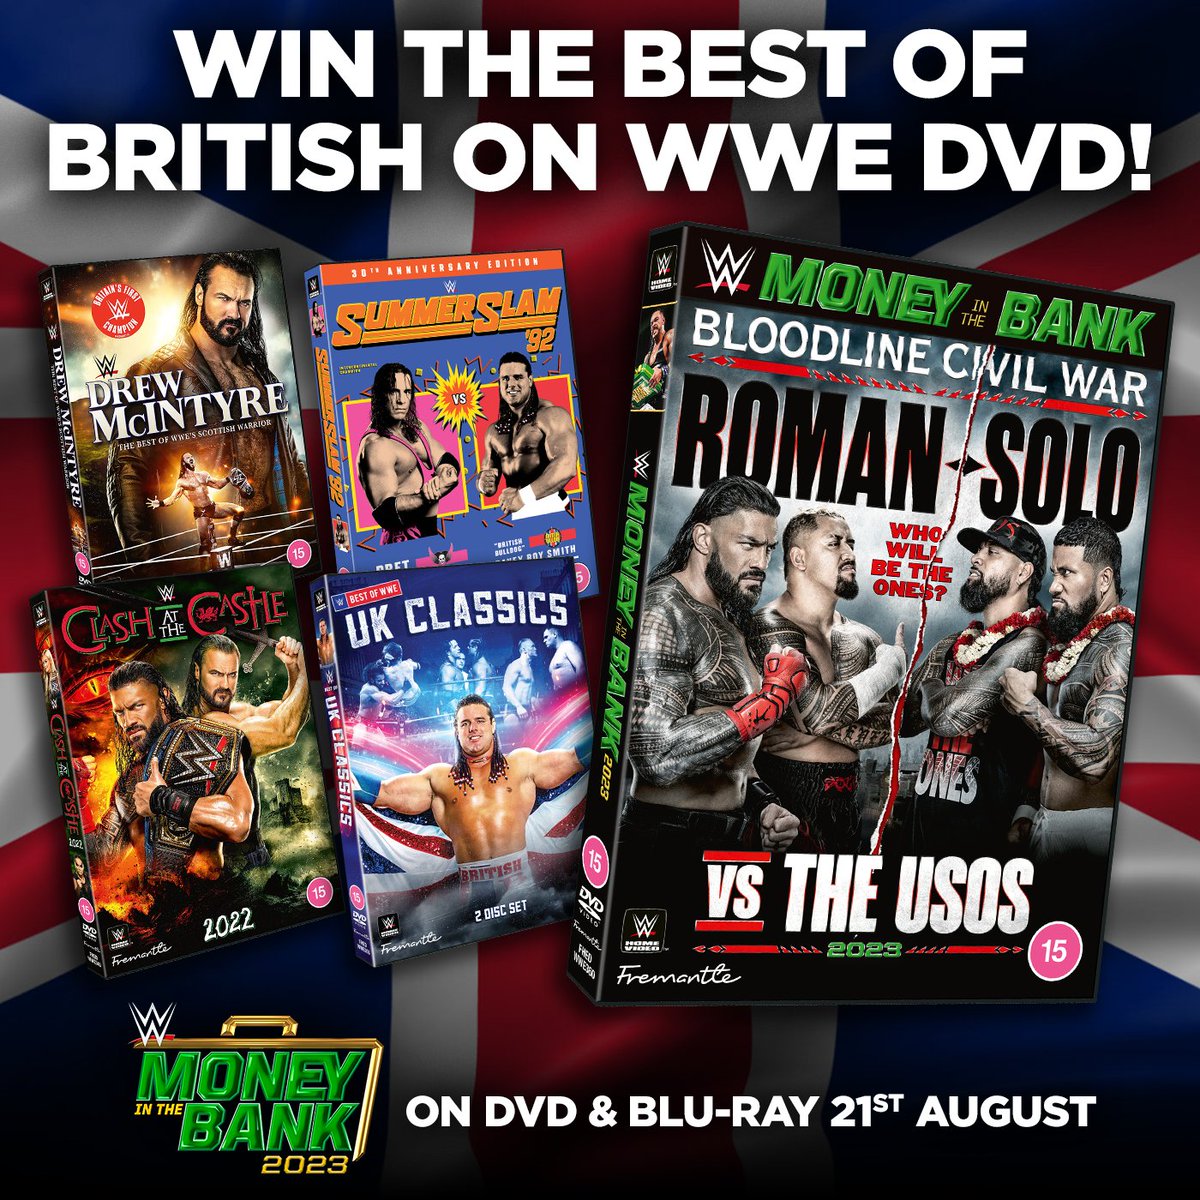 FOLLOW & RT for a chance to #WIN a best of British WWE DVD #prize bundle – including the all-new Money in the Bank 2023, direct from the O2 in London! #Competition ends 14th August 🇬🇧